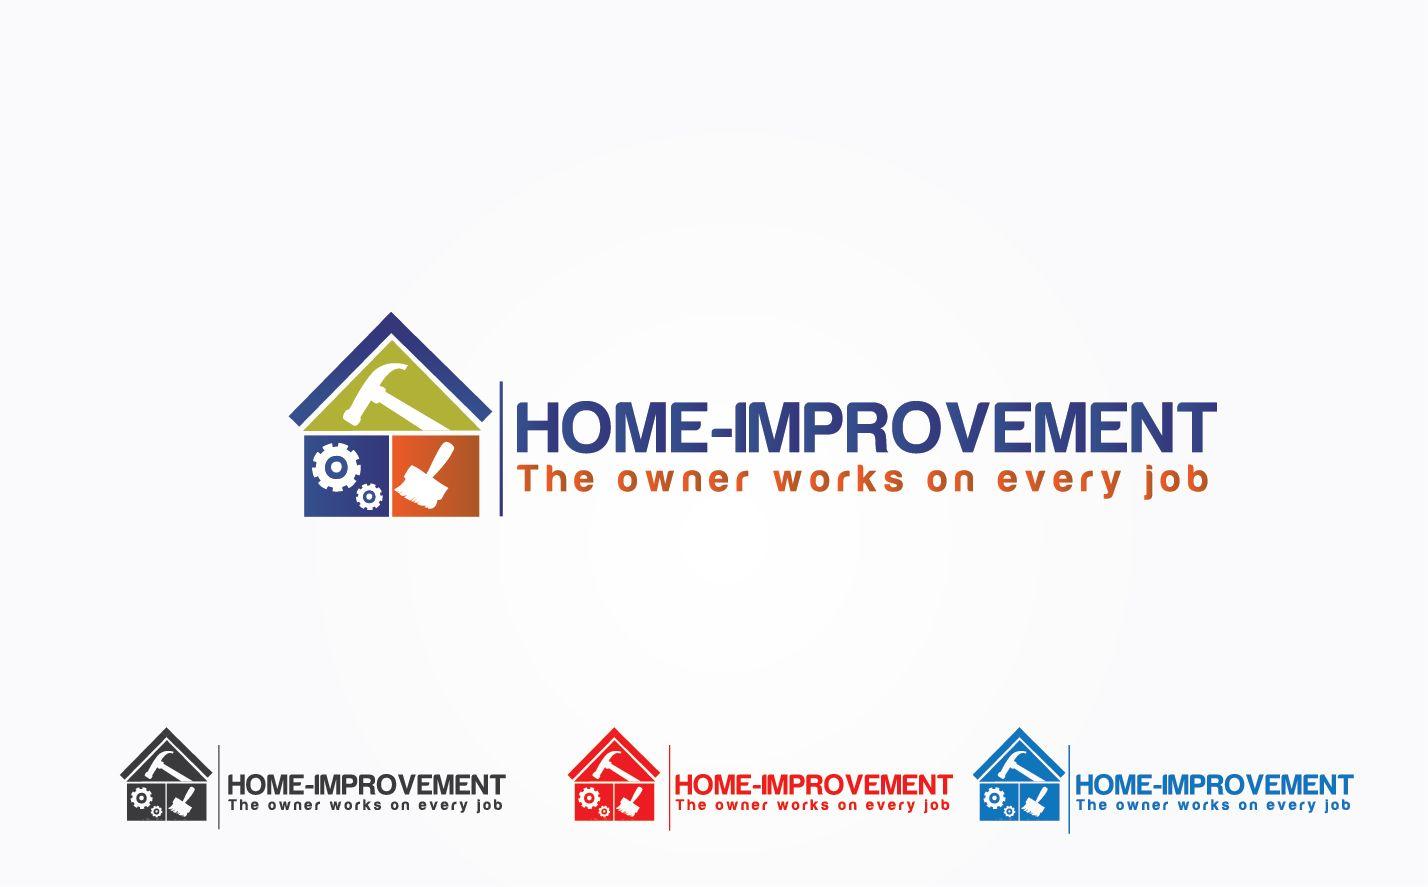 Home Improvement Company Logo - Business Logo Design for The company tagline is The owner works